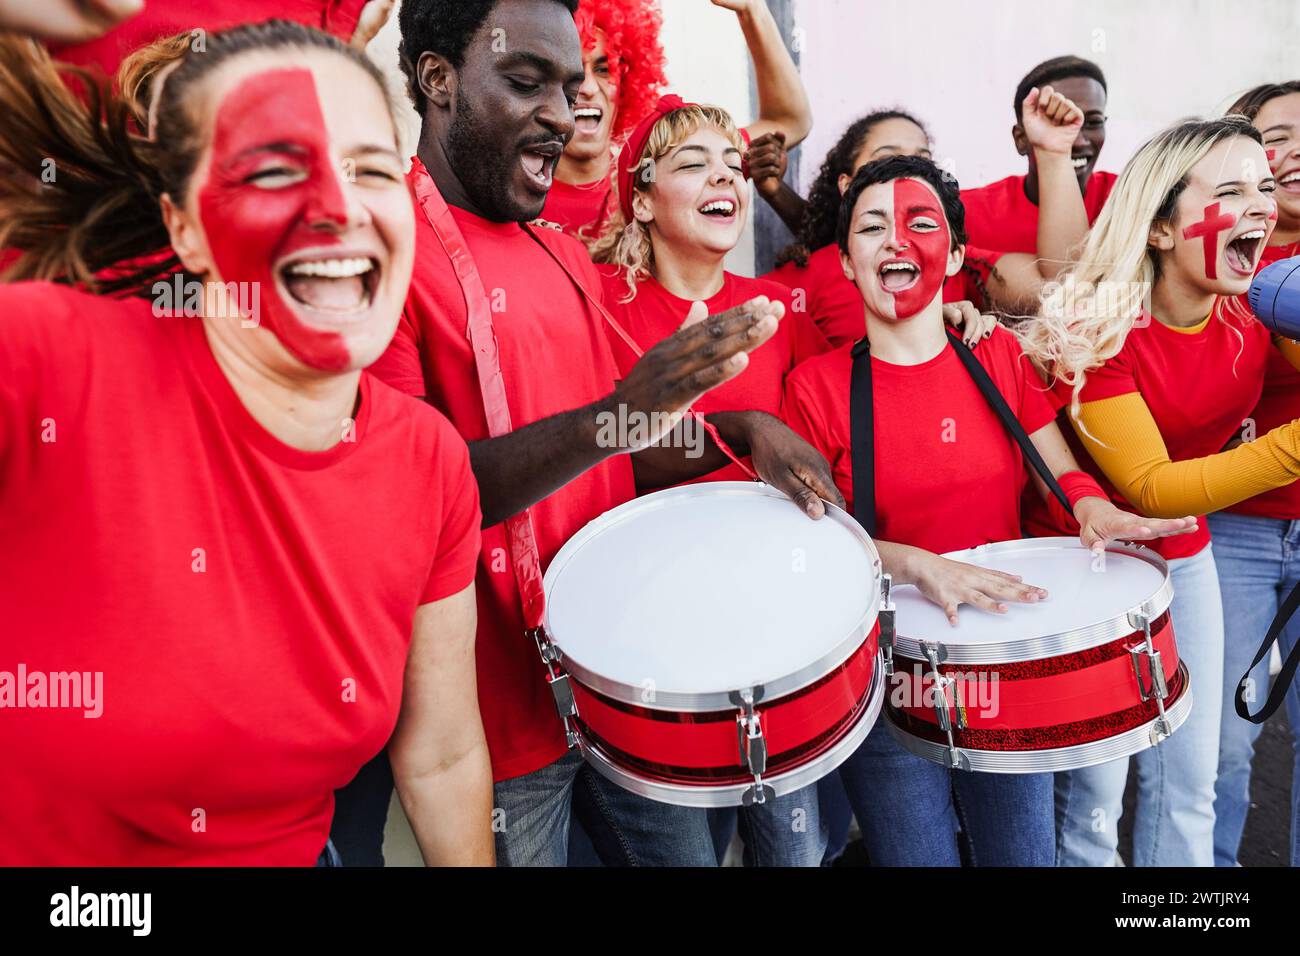 Multiracial sport fans singing while supporting their team - Football supporters having fun outside of stadium wearing red t-shirts - Event and bettin Stock Photo